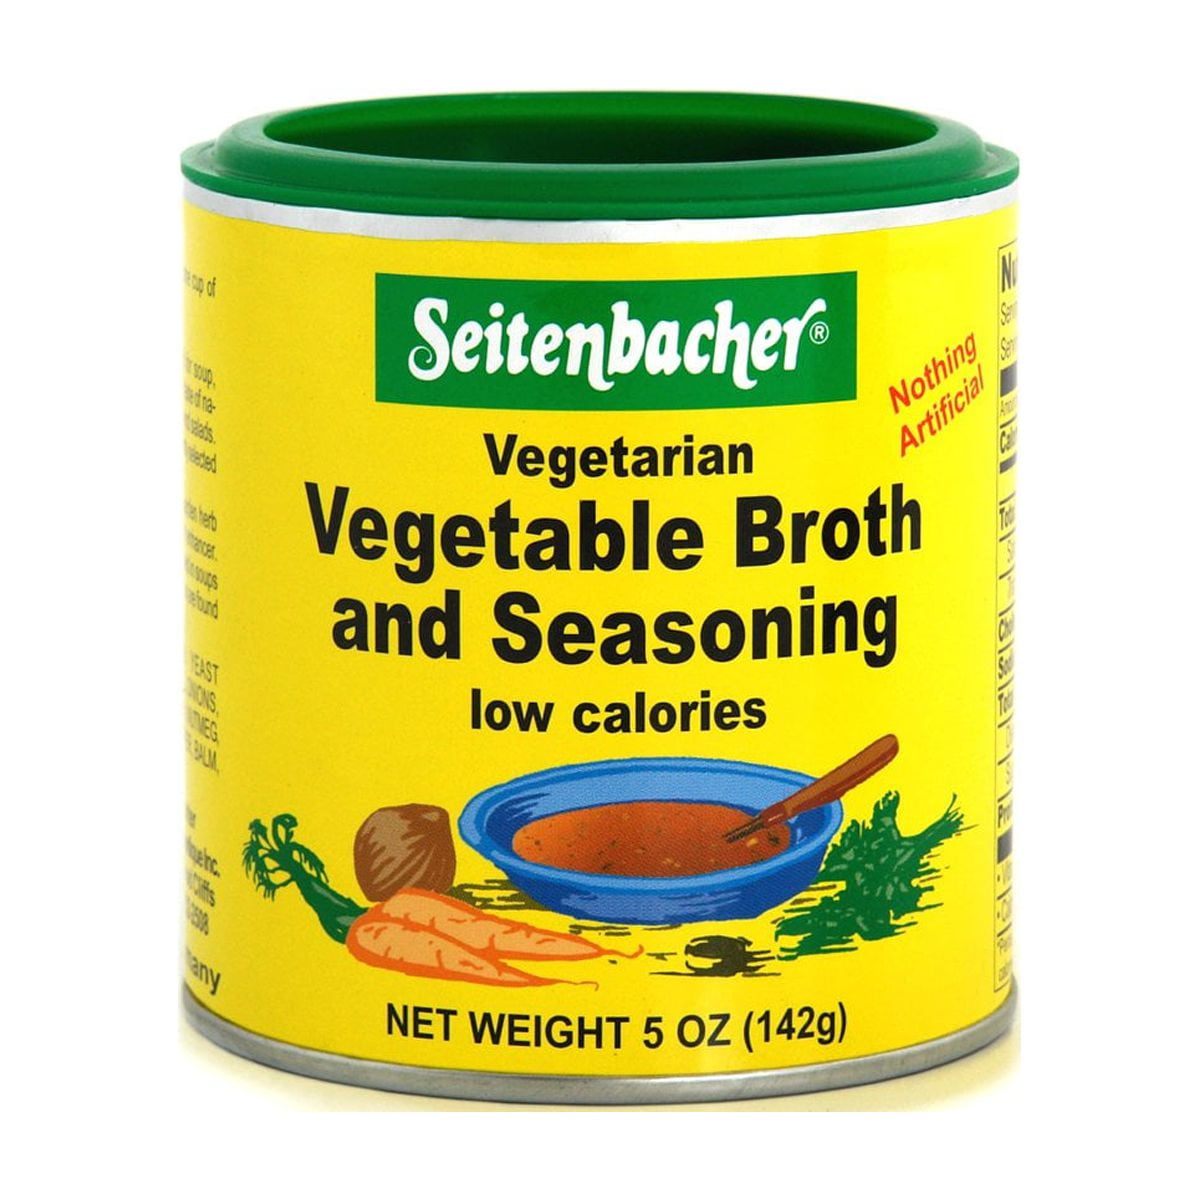 Vegetable Slayer - Brozzian Spices